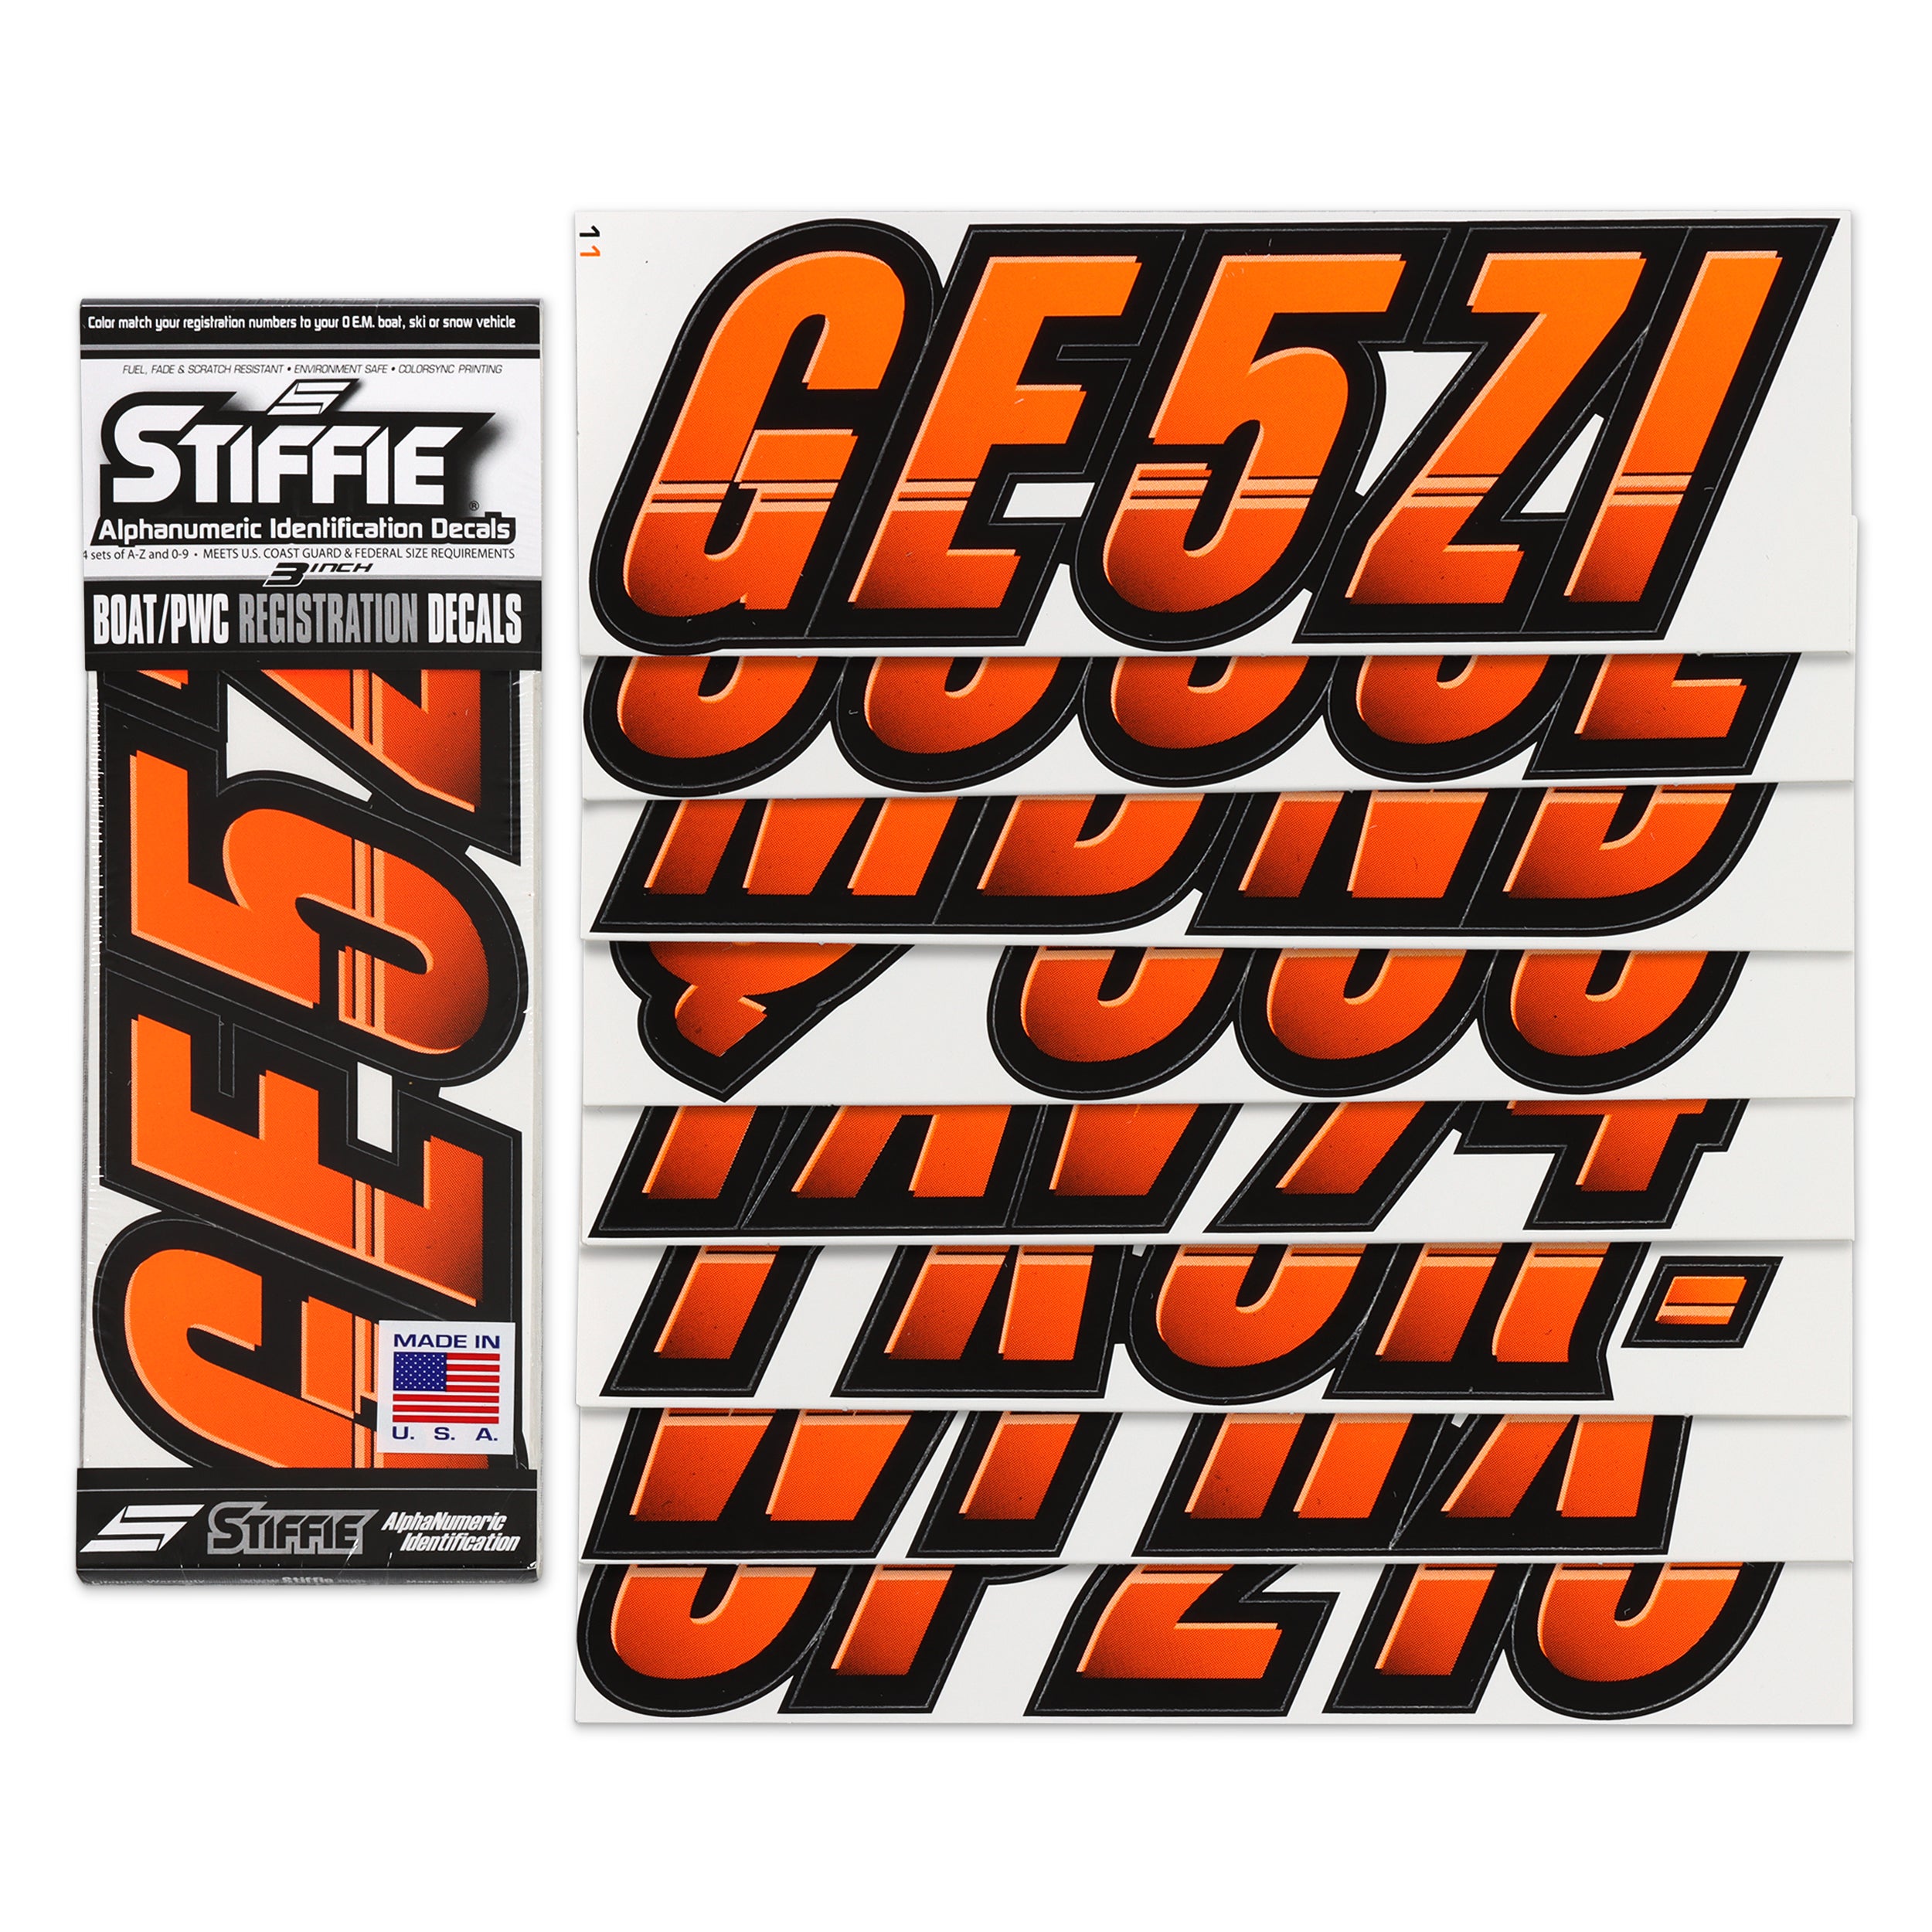 STIFFIE Techtron Electric Orange / Black 3" Alpha-Numeric Registration Identification Numbers Stickers Decals for Boats & Personal Watercraft